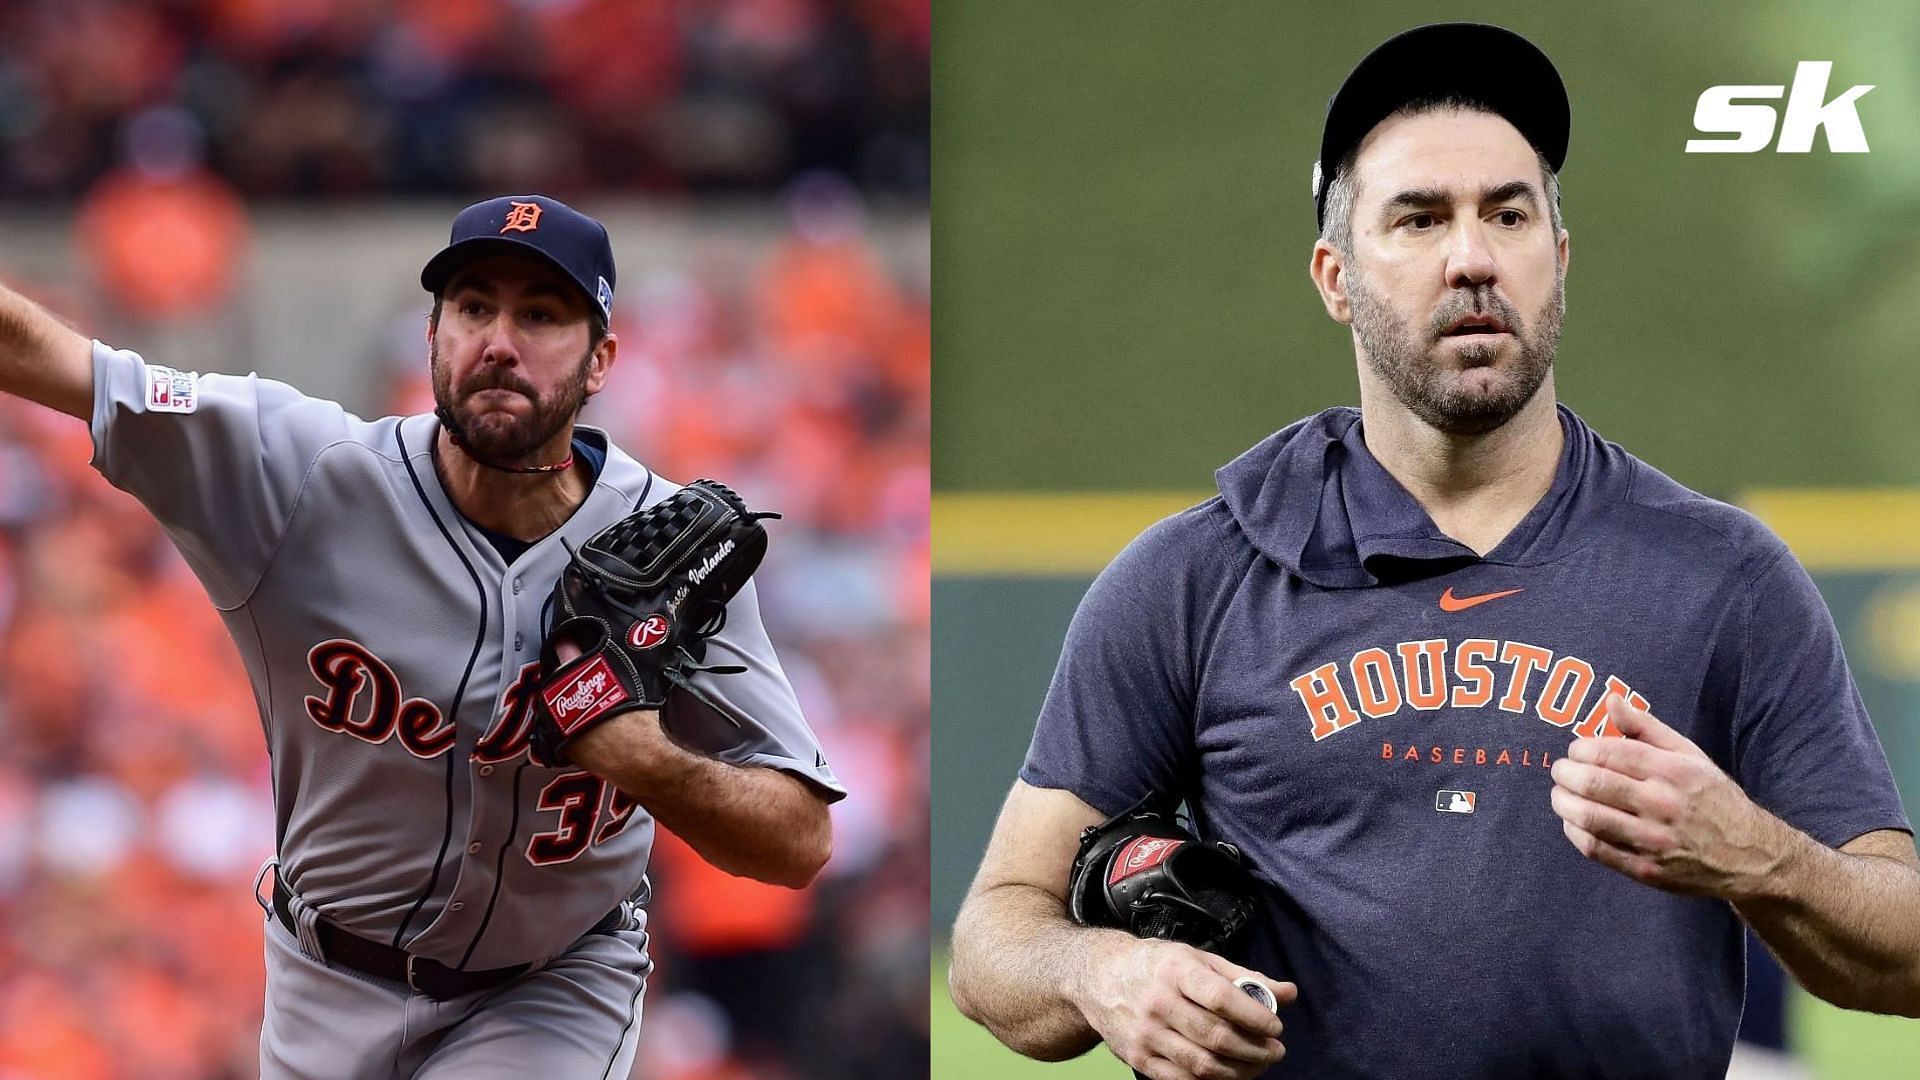 Google Bard believes that Justin Verlander could retire at the end of his current contract